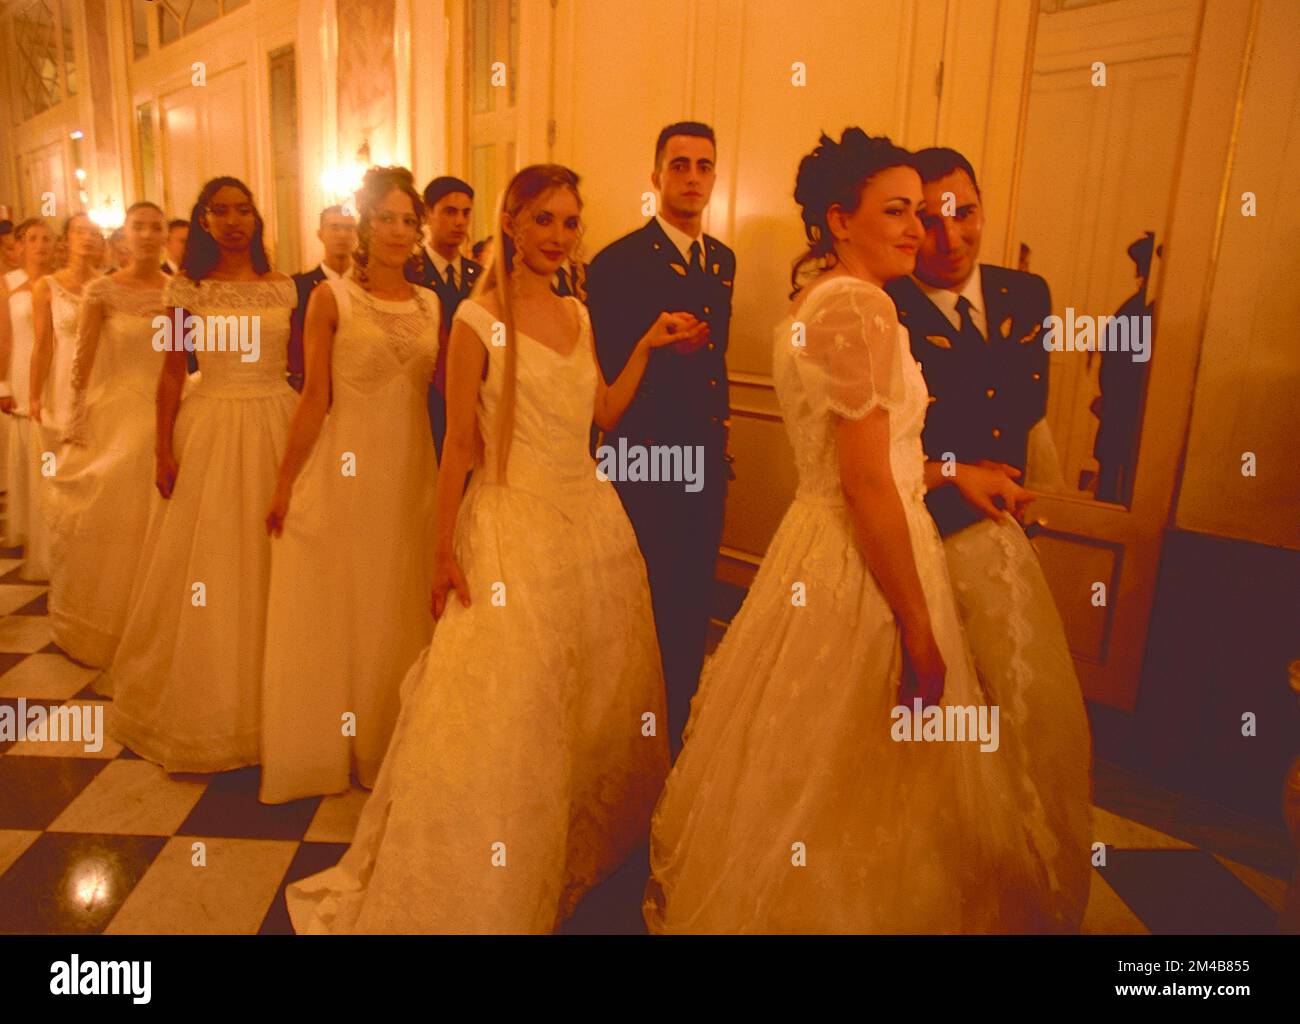 Girls in white dress and boys in uniform at the debutante ball, Vatican City 2000 Stock Photo